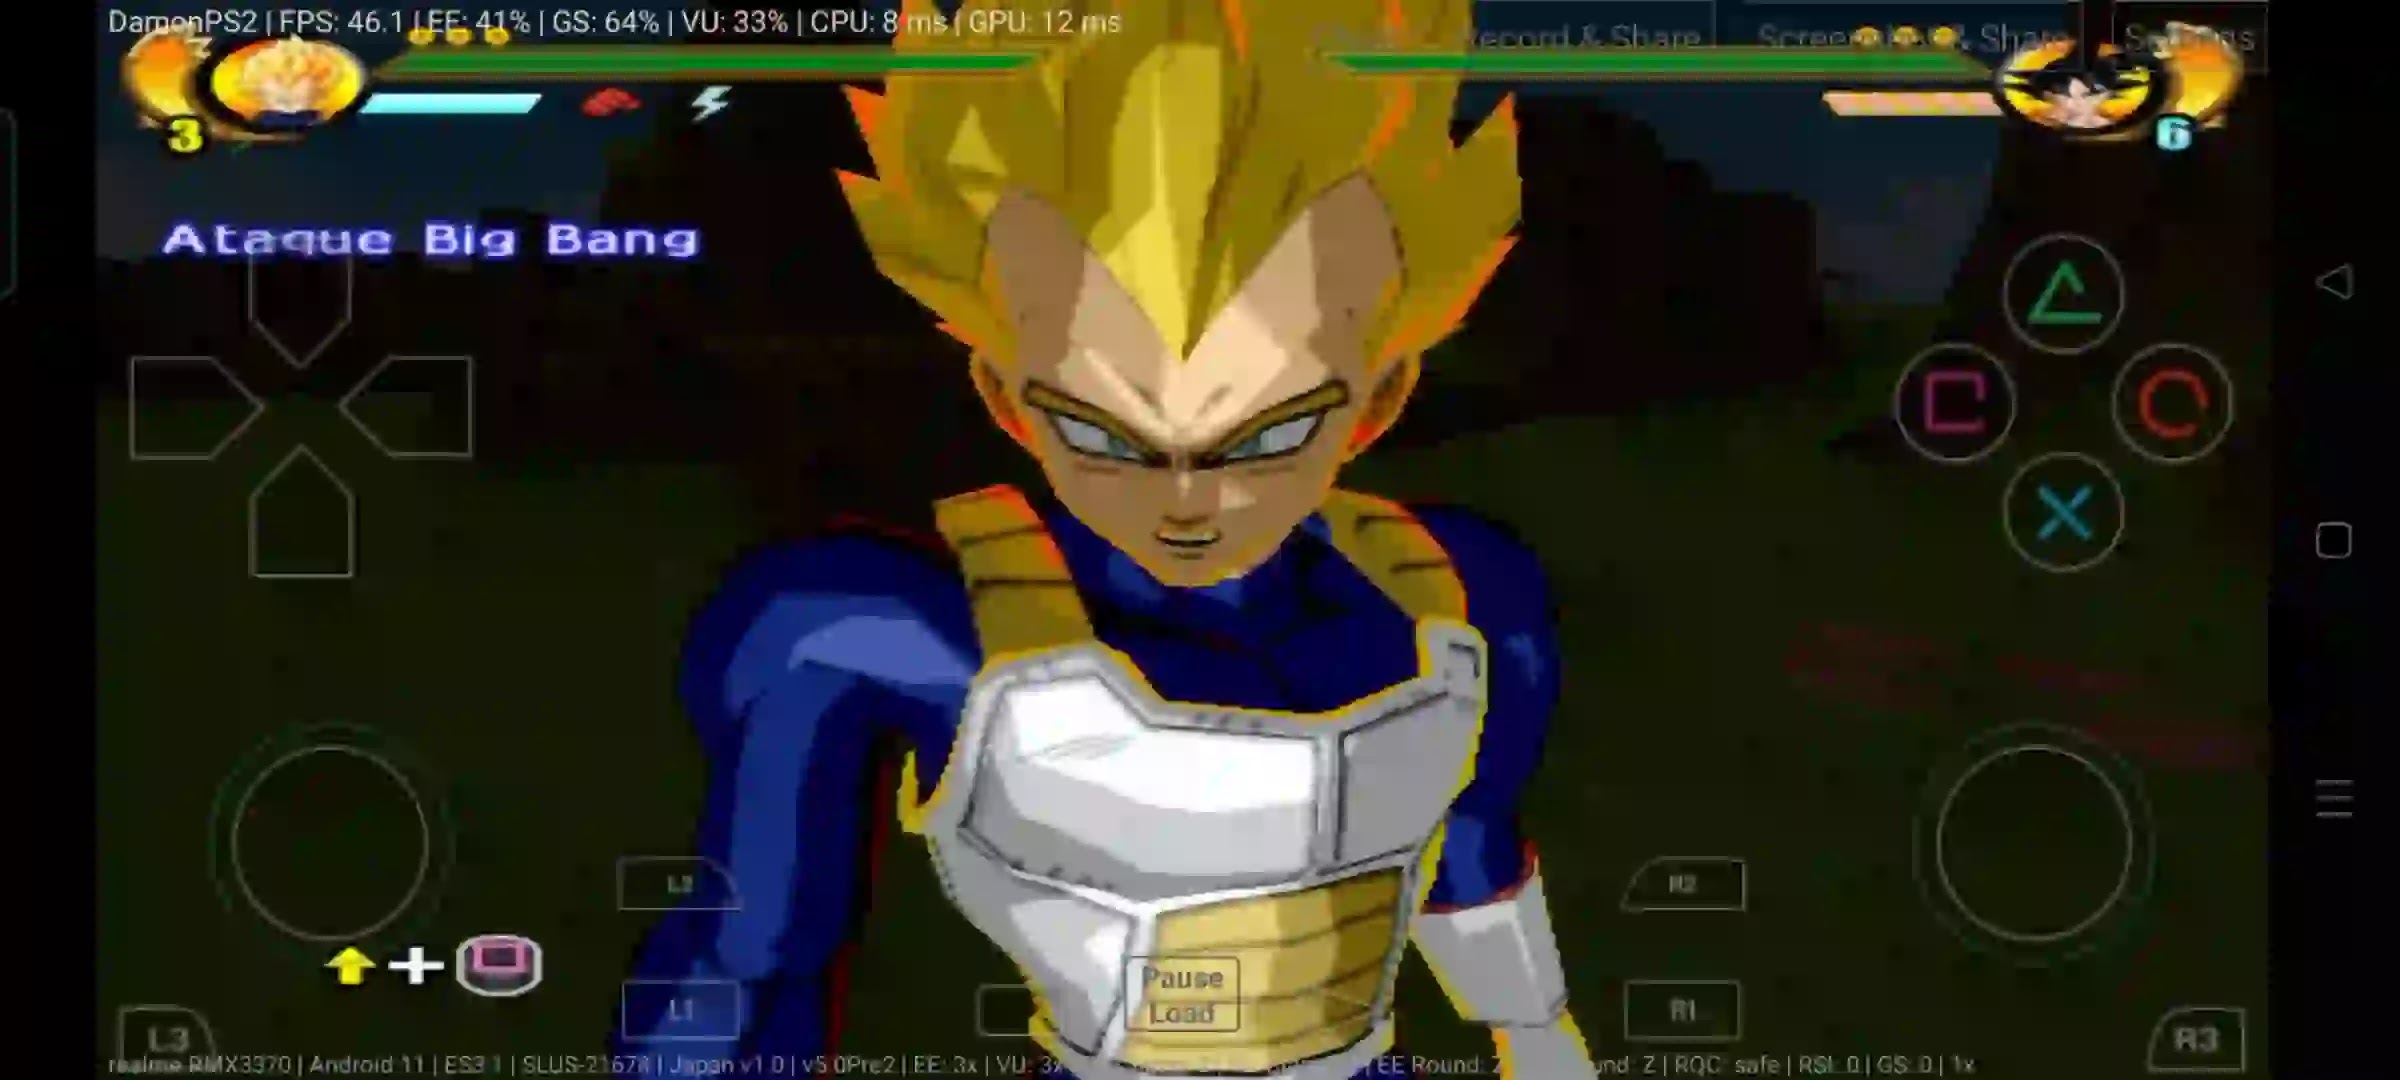 Dragon Ball Z Game For AetherSX2 Emulator